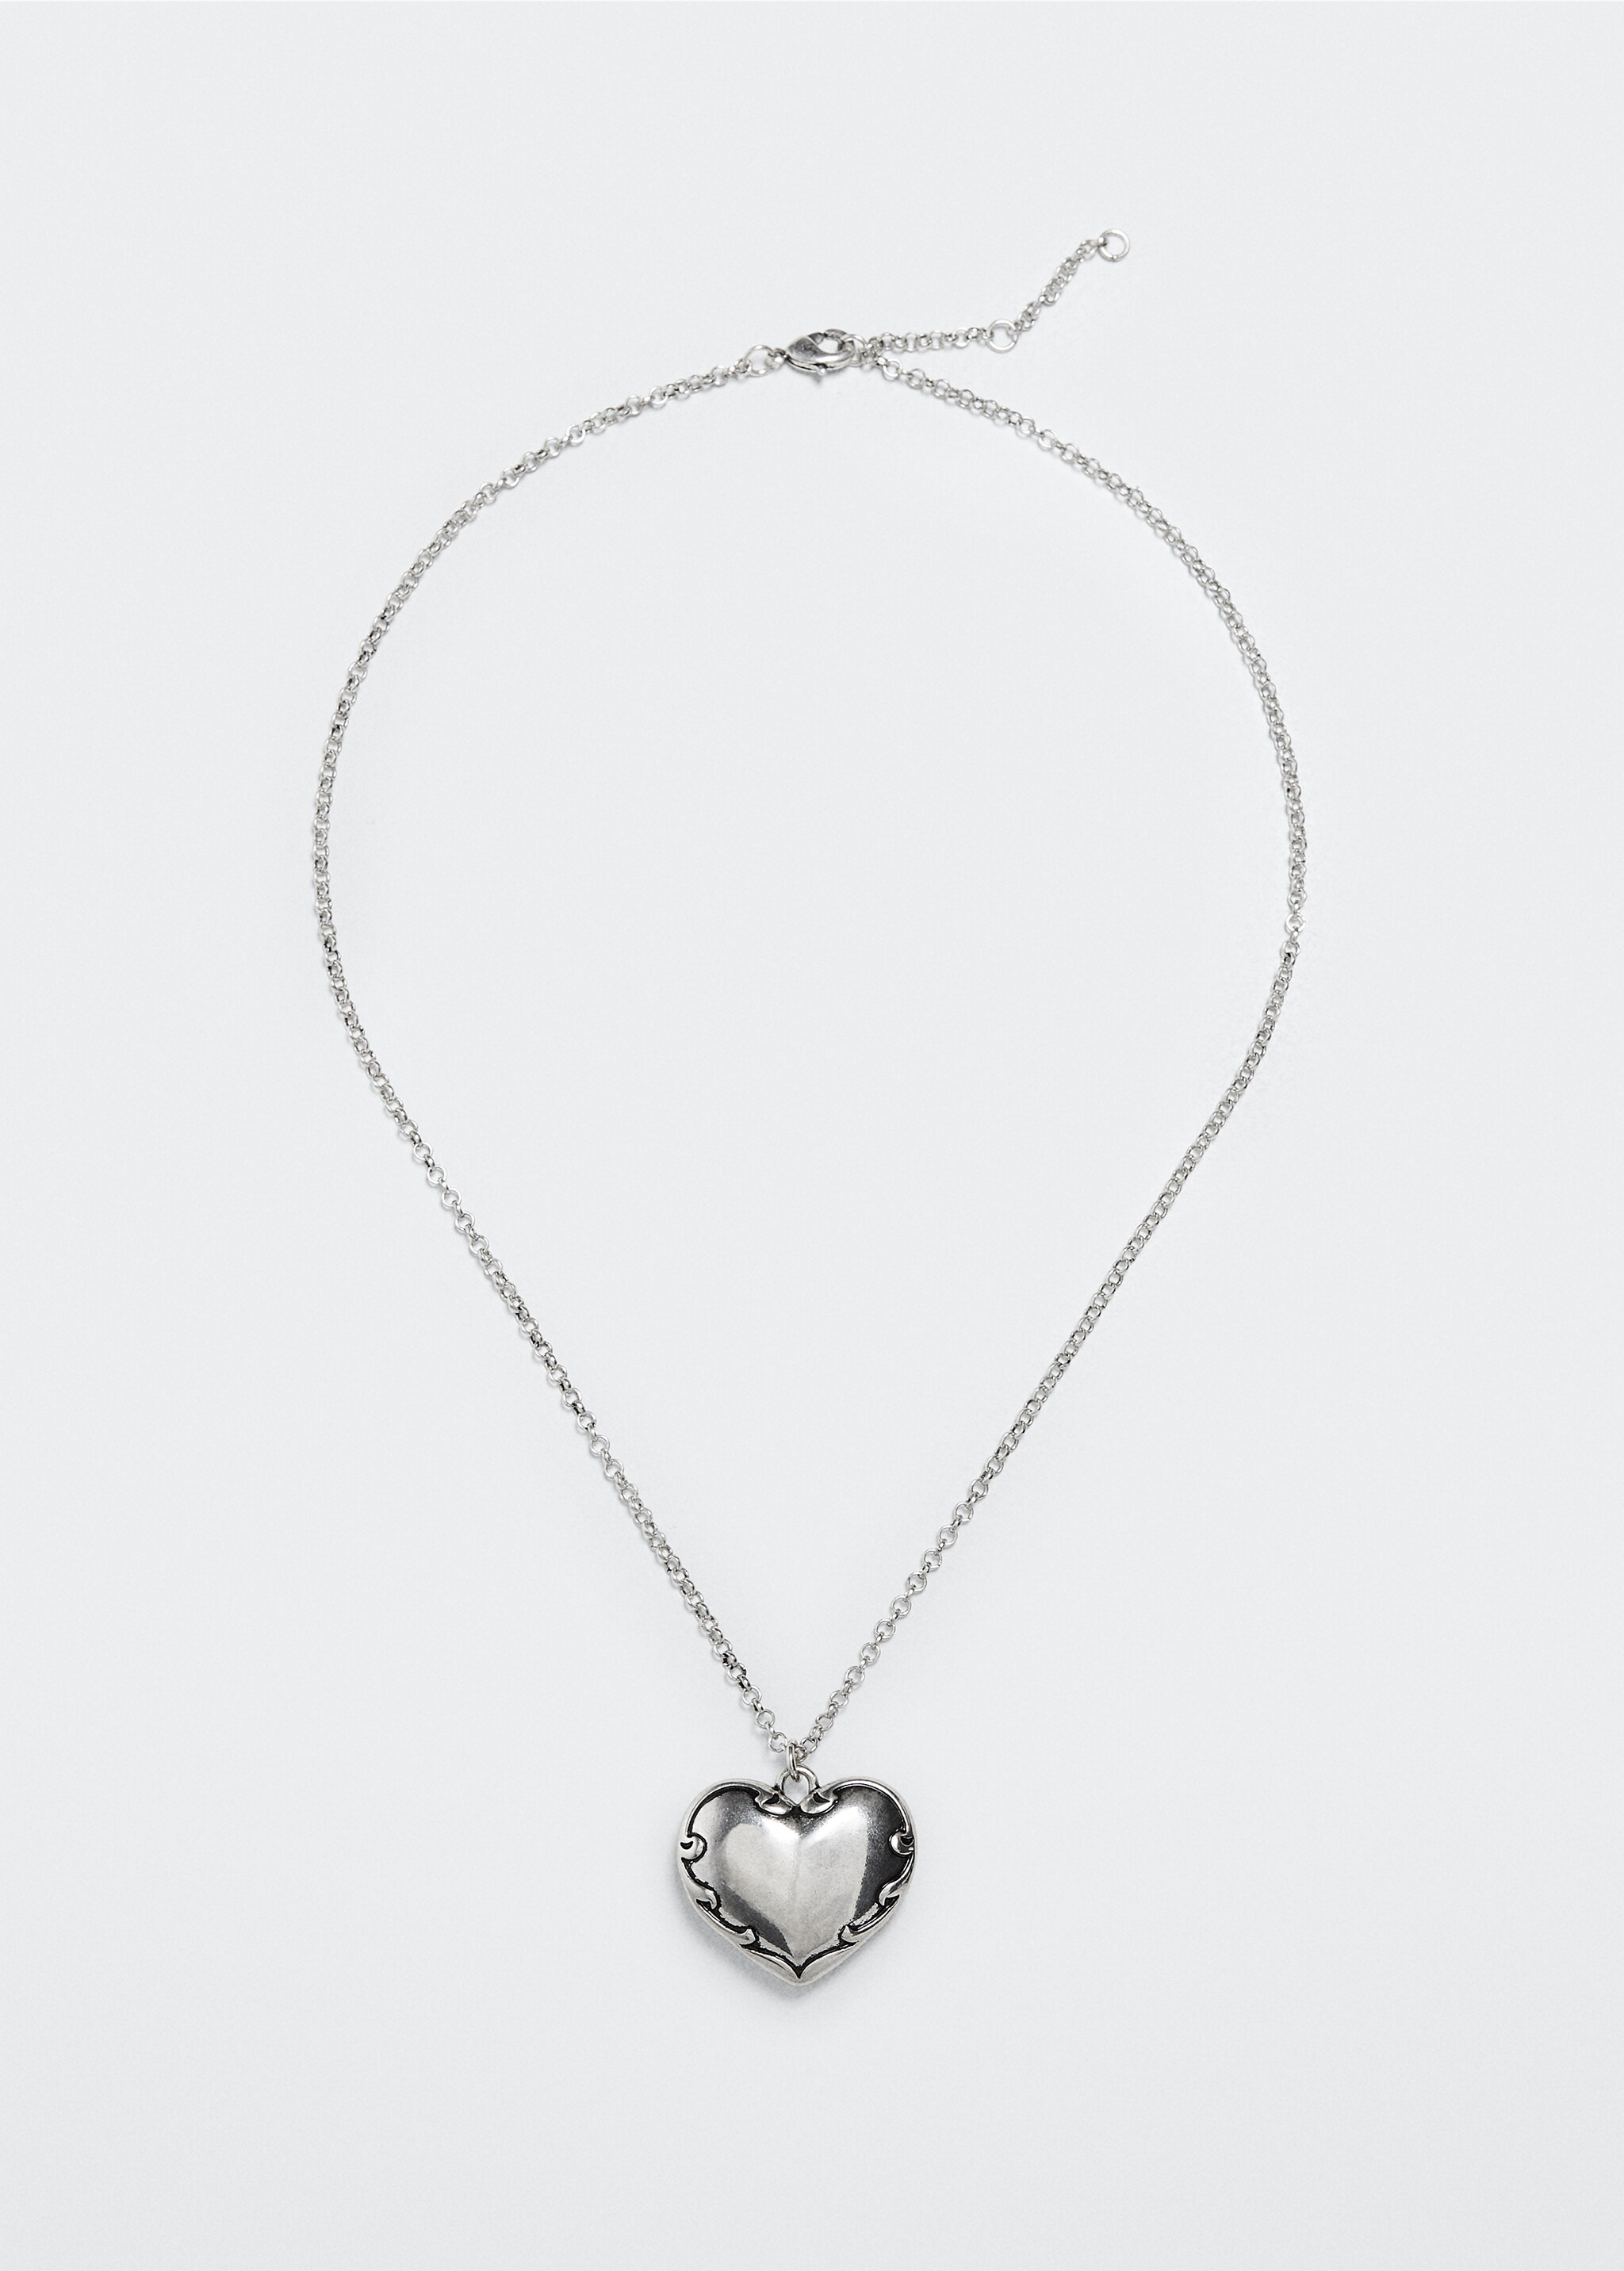 Heart pendant necklace - Article without model